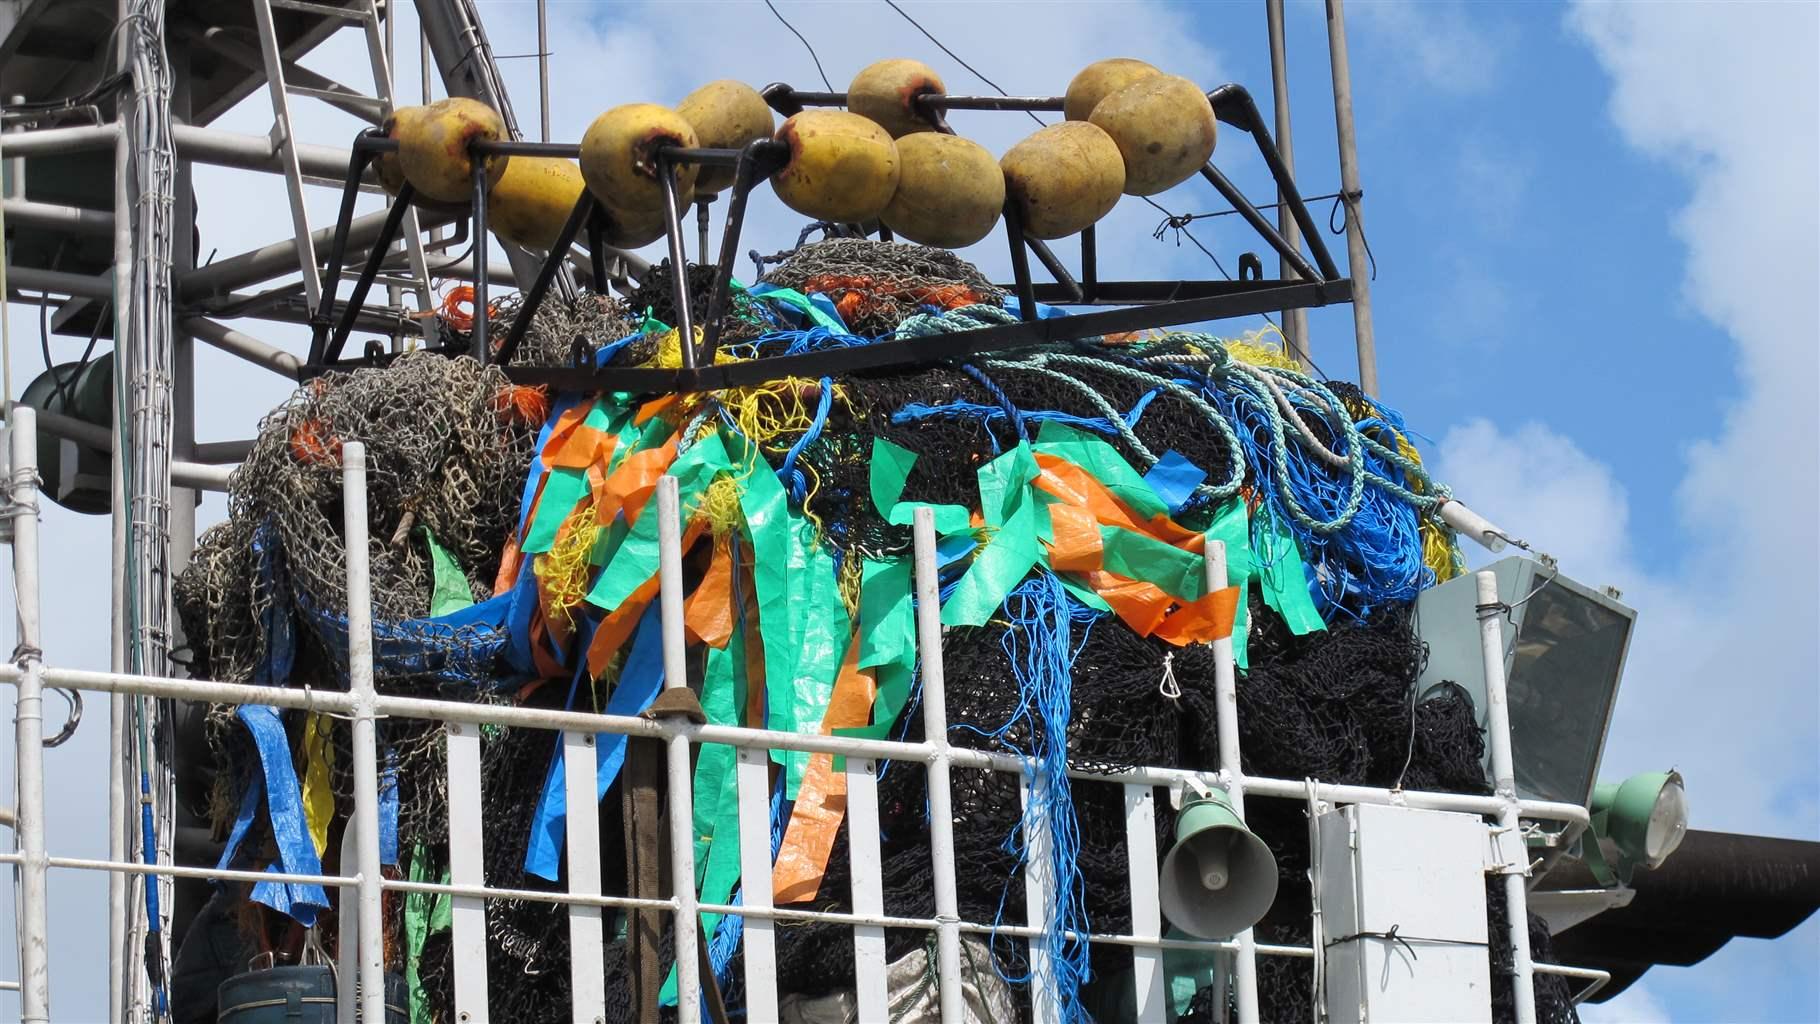 Stronger Rules Needed for Widely-Used Tuna Fishing Gear in Pacific